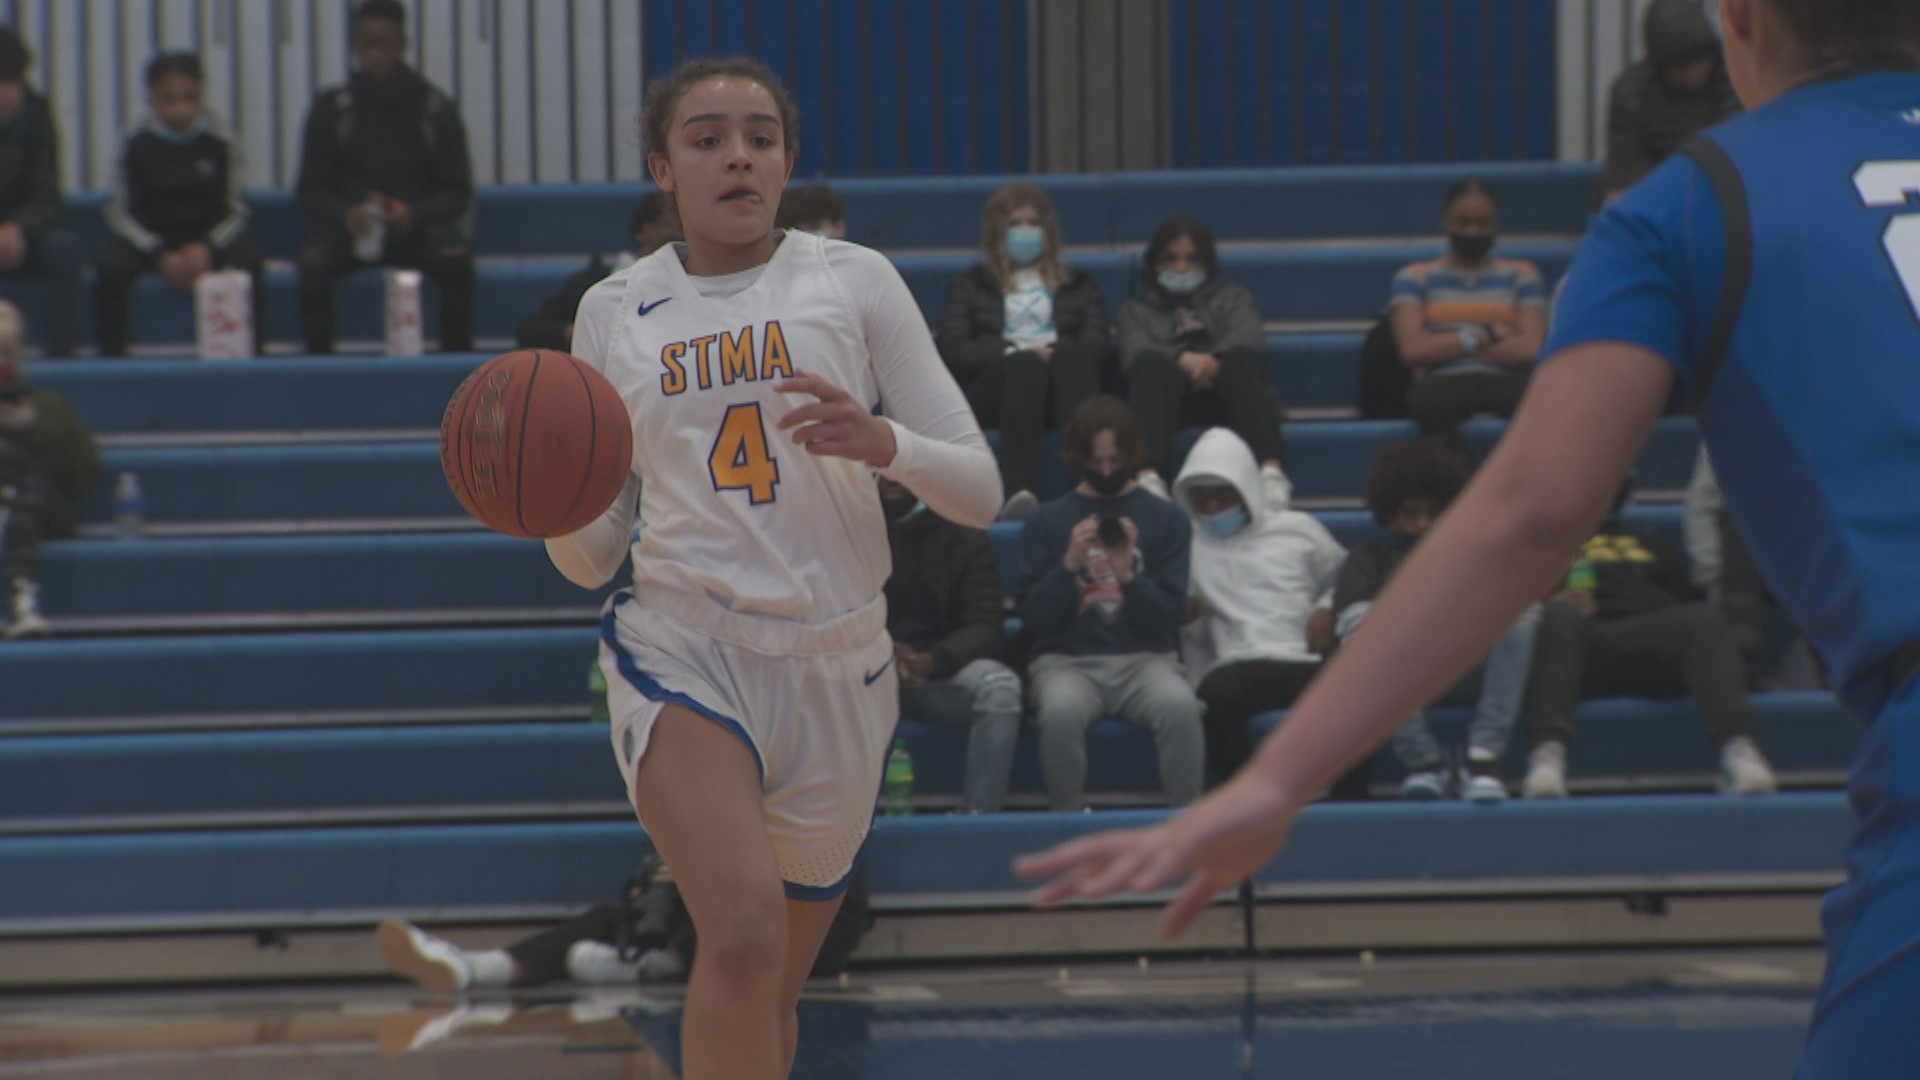 STMA's Tessa Johnson overcame a gruesome leg injury to lead her team in scoring.